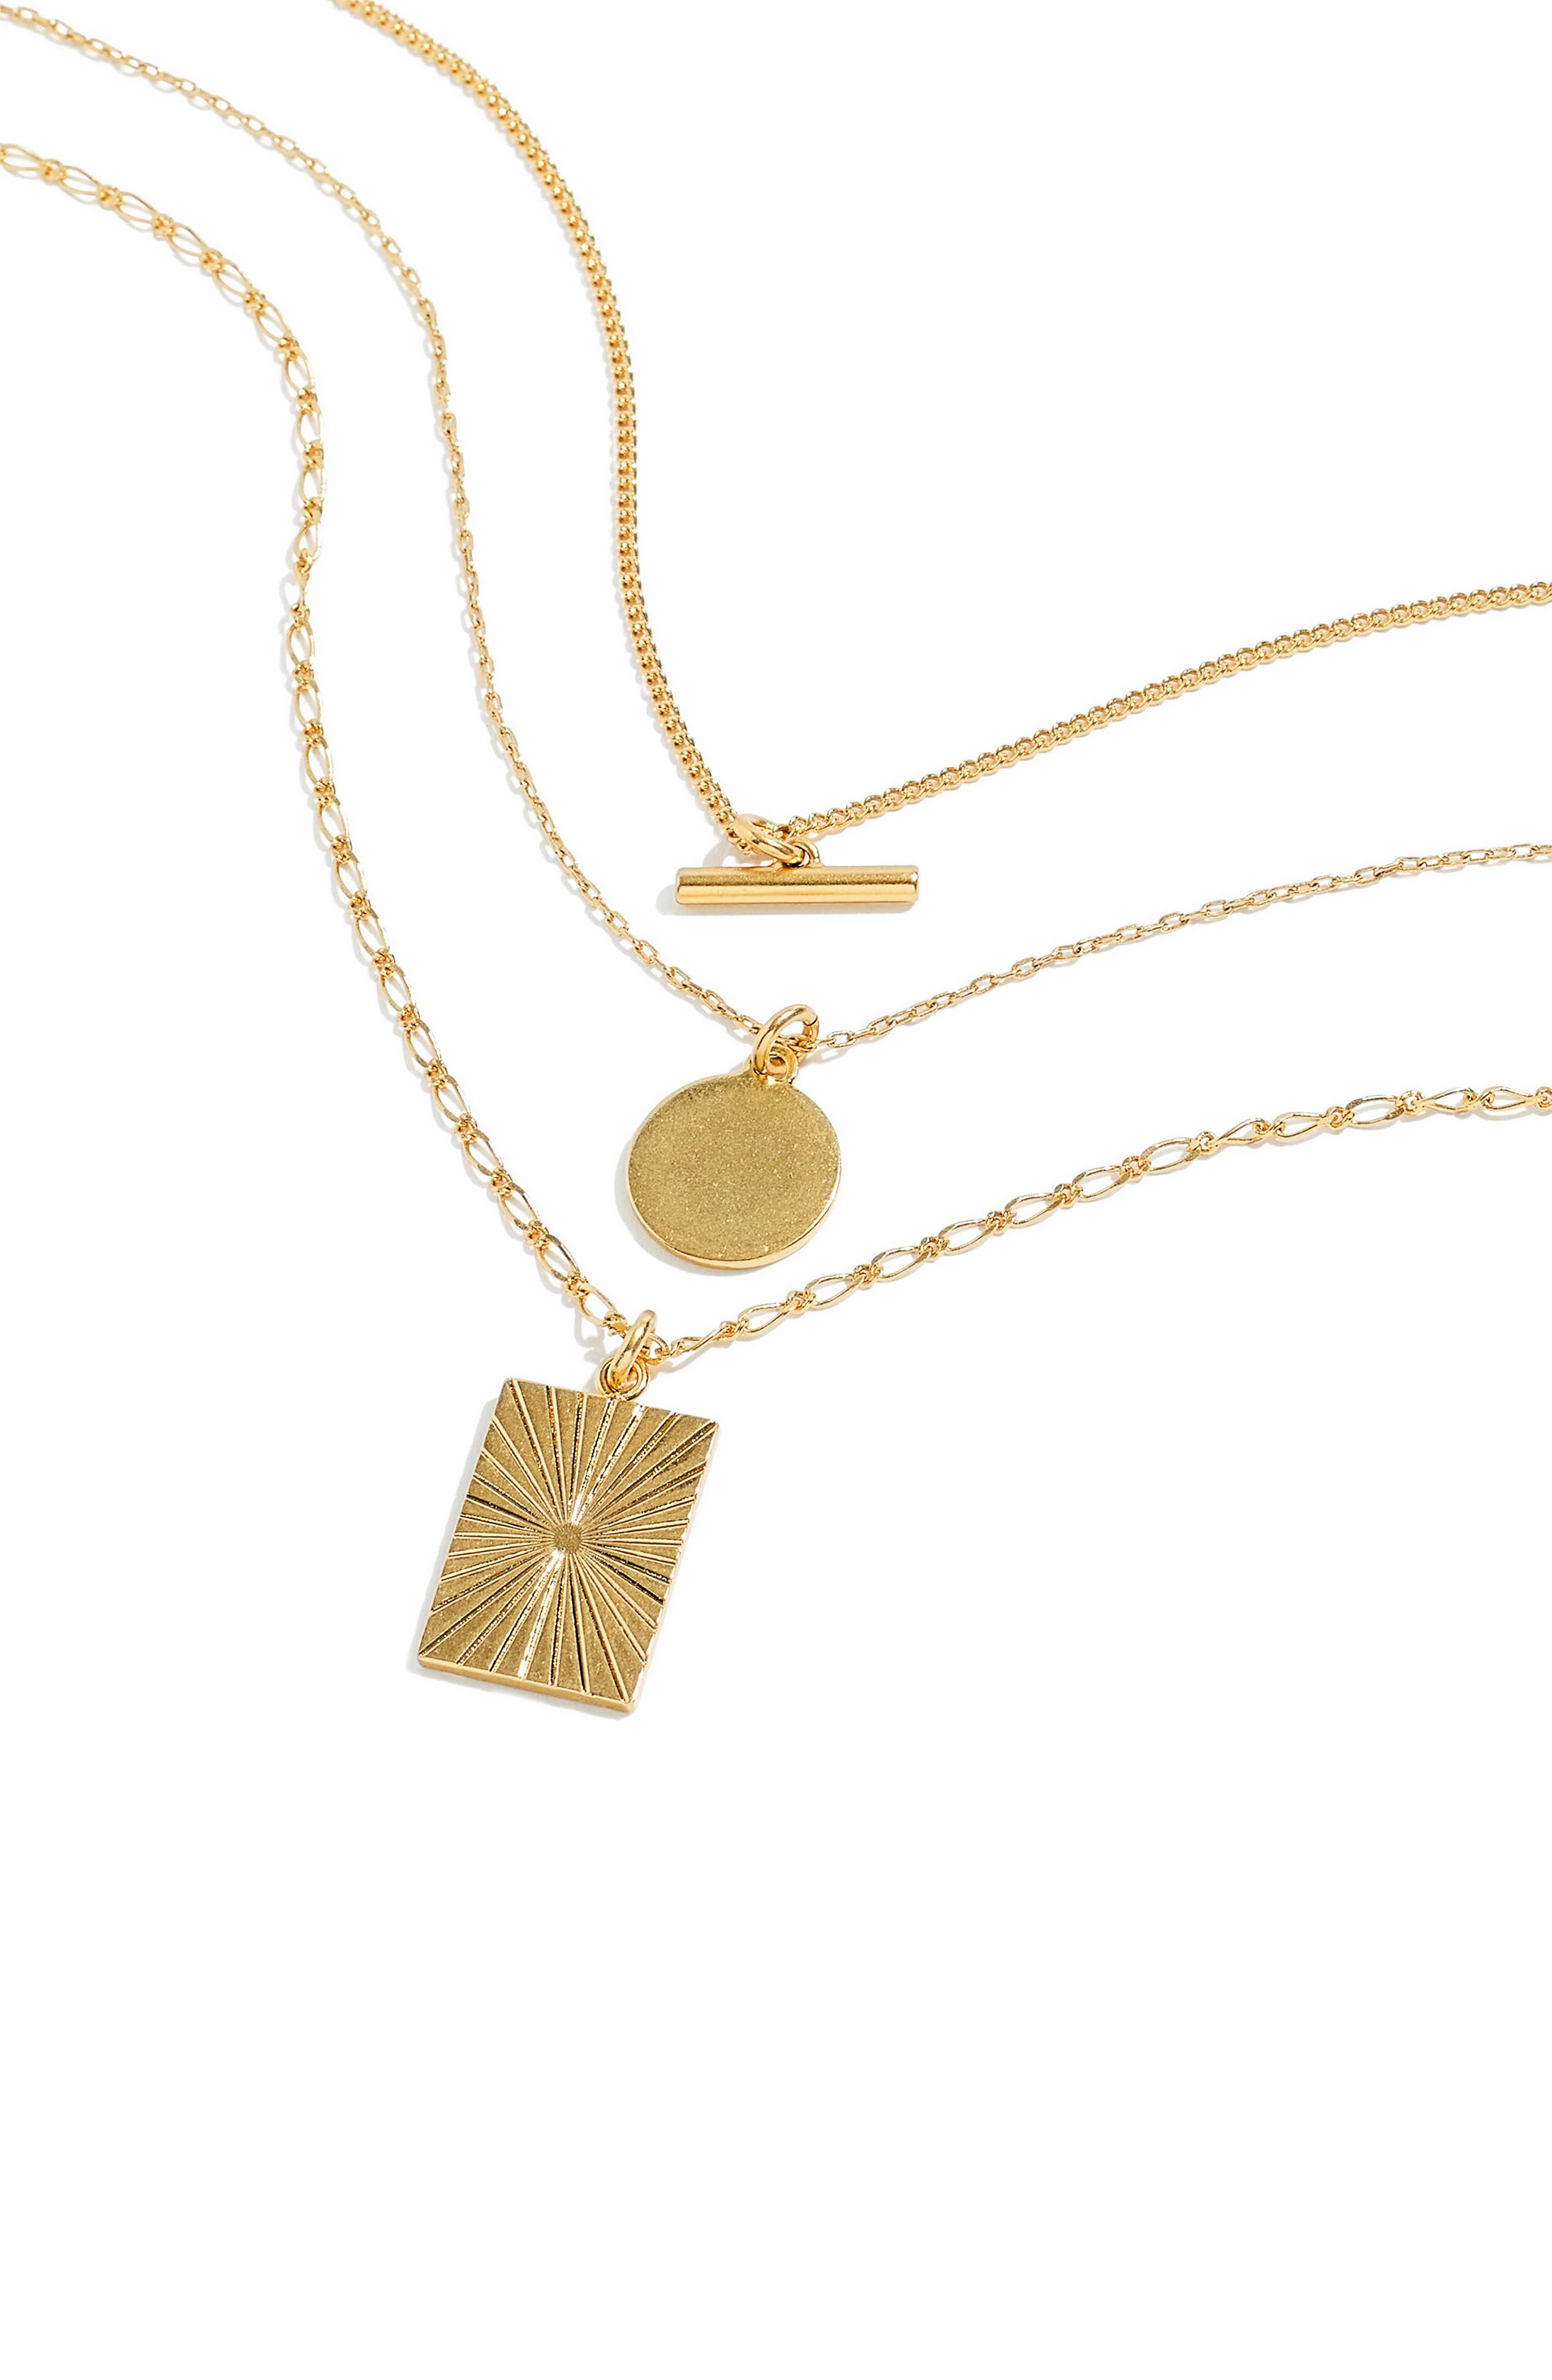 Two Madewell Gold Tone Layering Necklaces